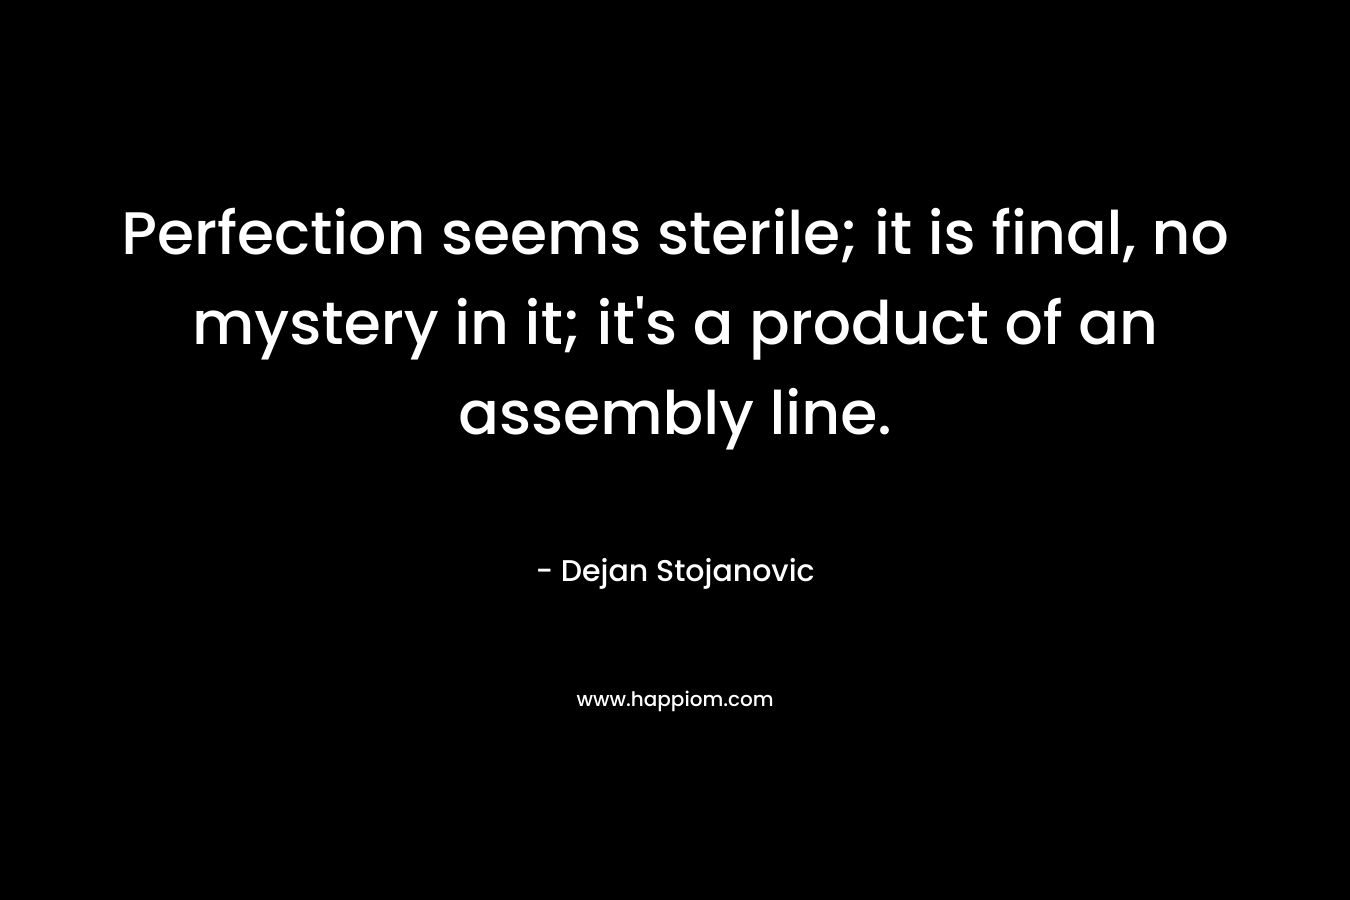 Perfection seems sterile; it is final, no mystery in it; it's a product of an assembly line.